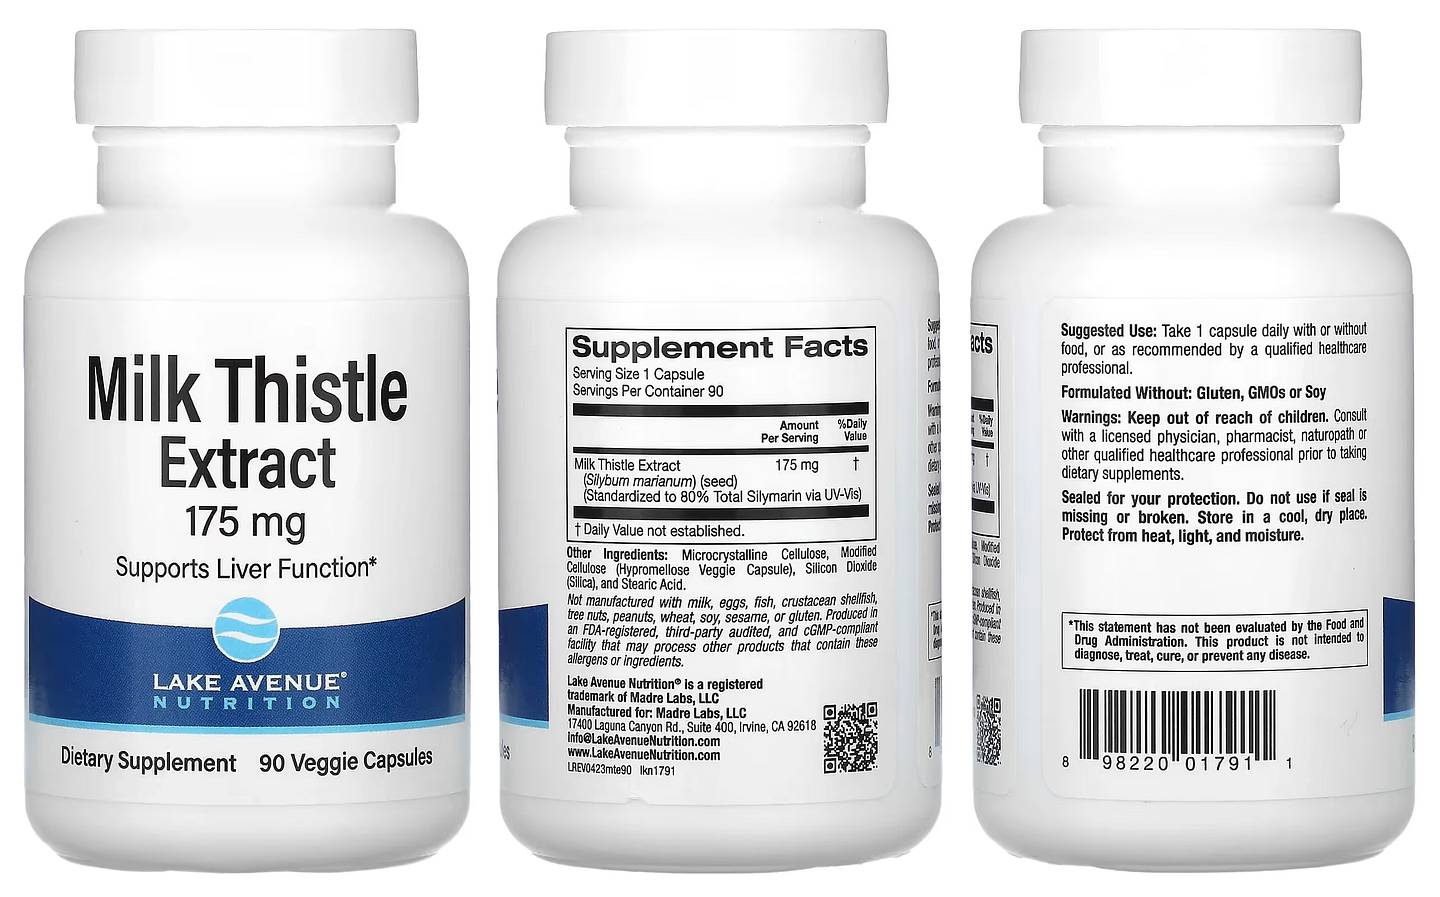 Lake Avenue Nutrition, Milk Thistle Extract packaging